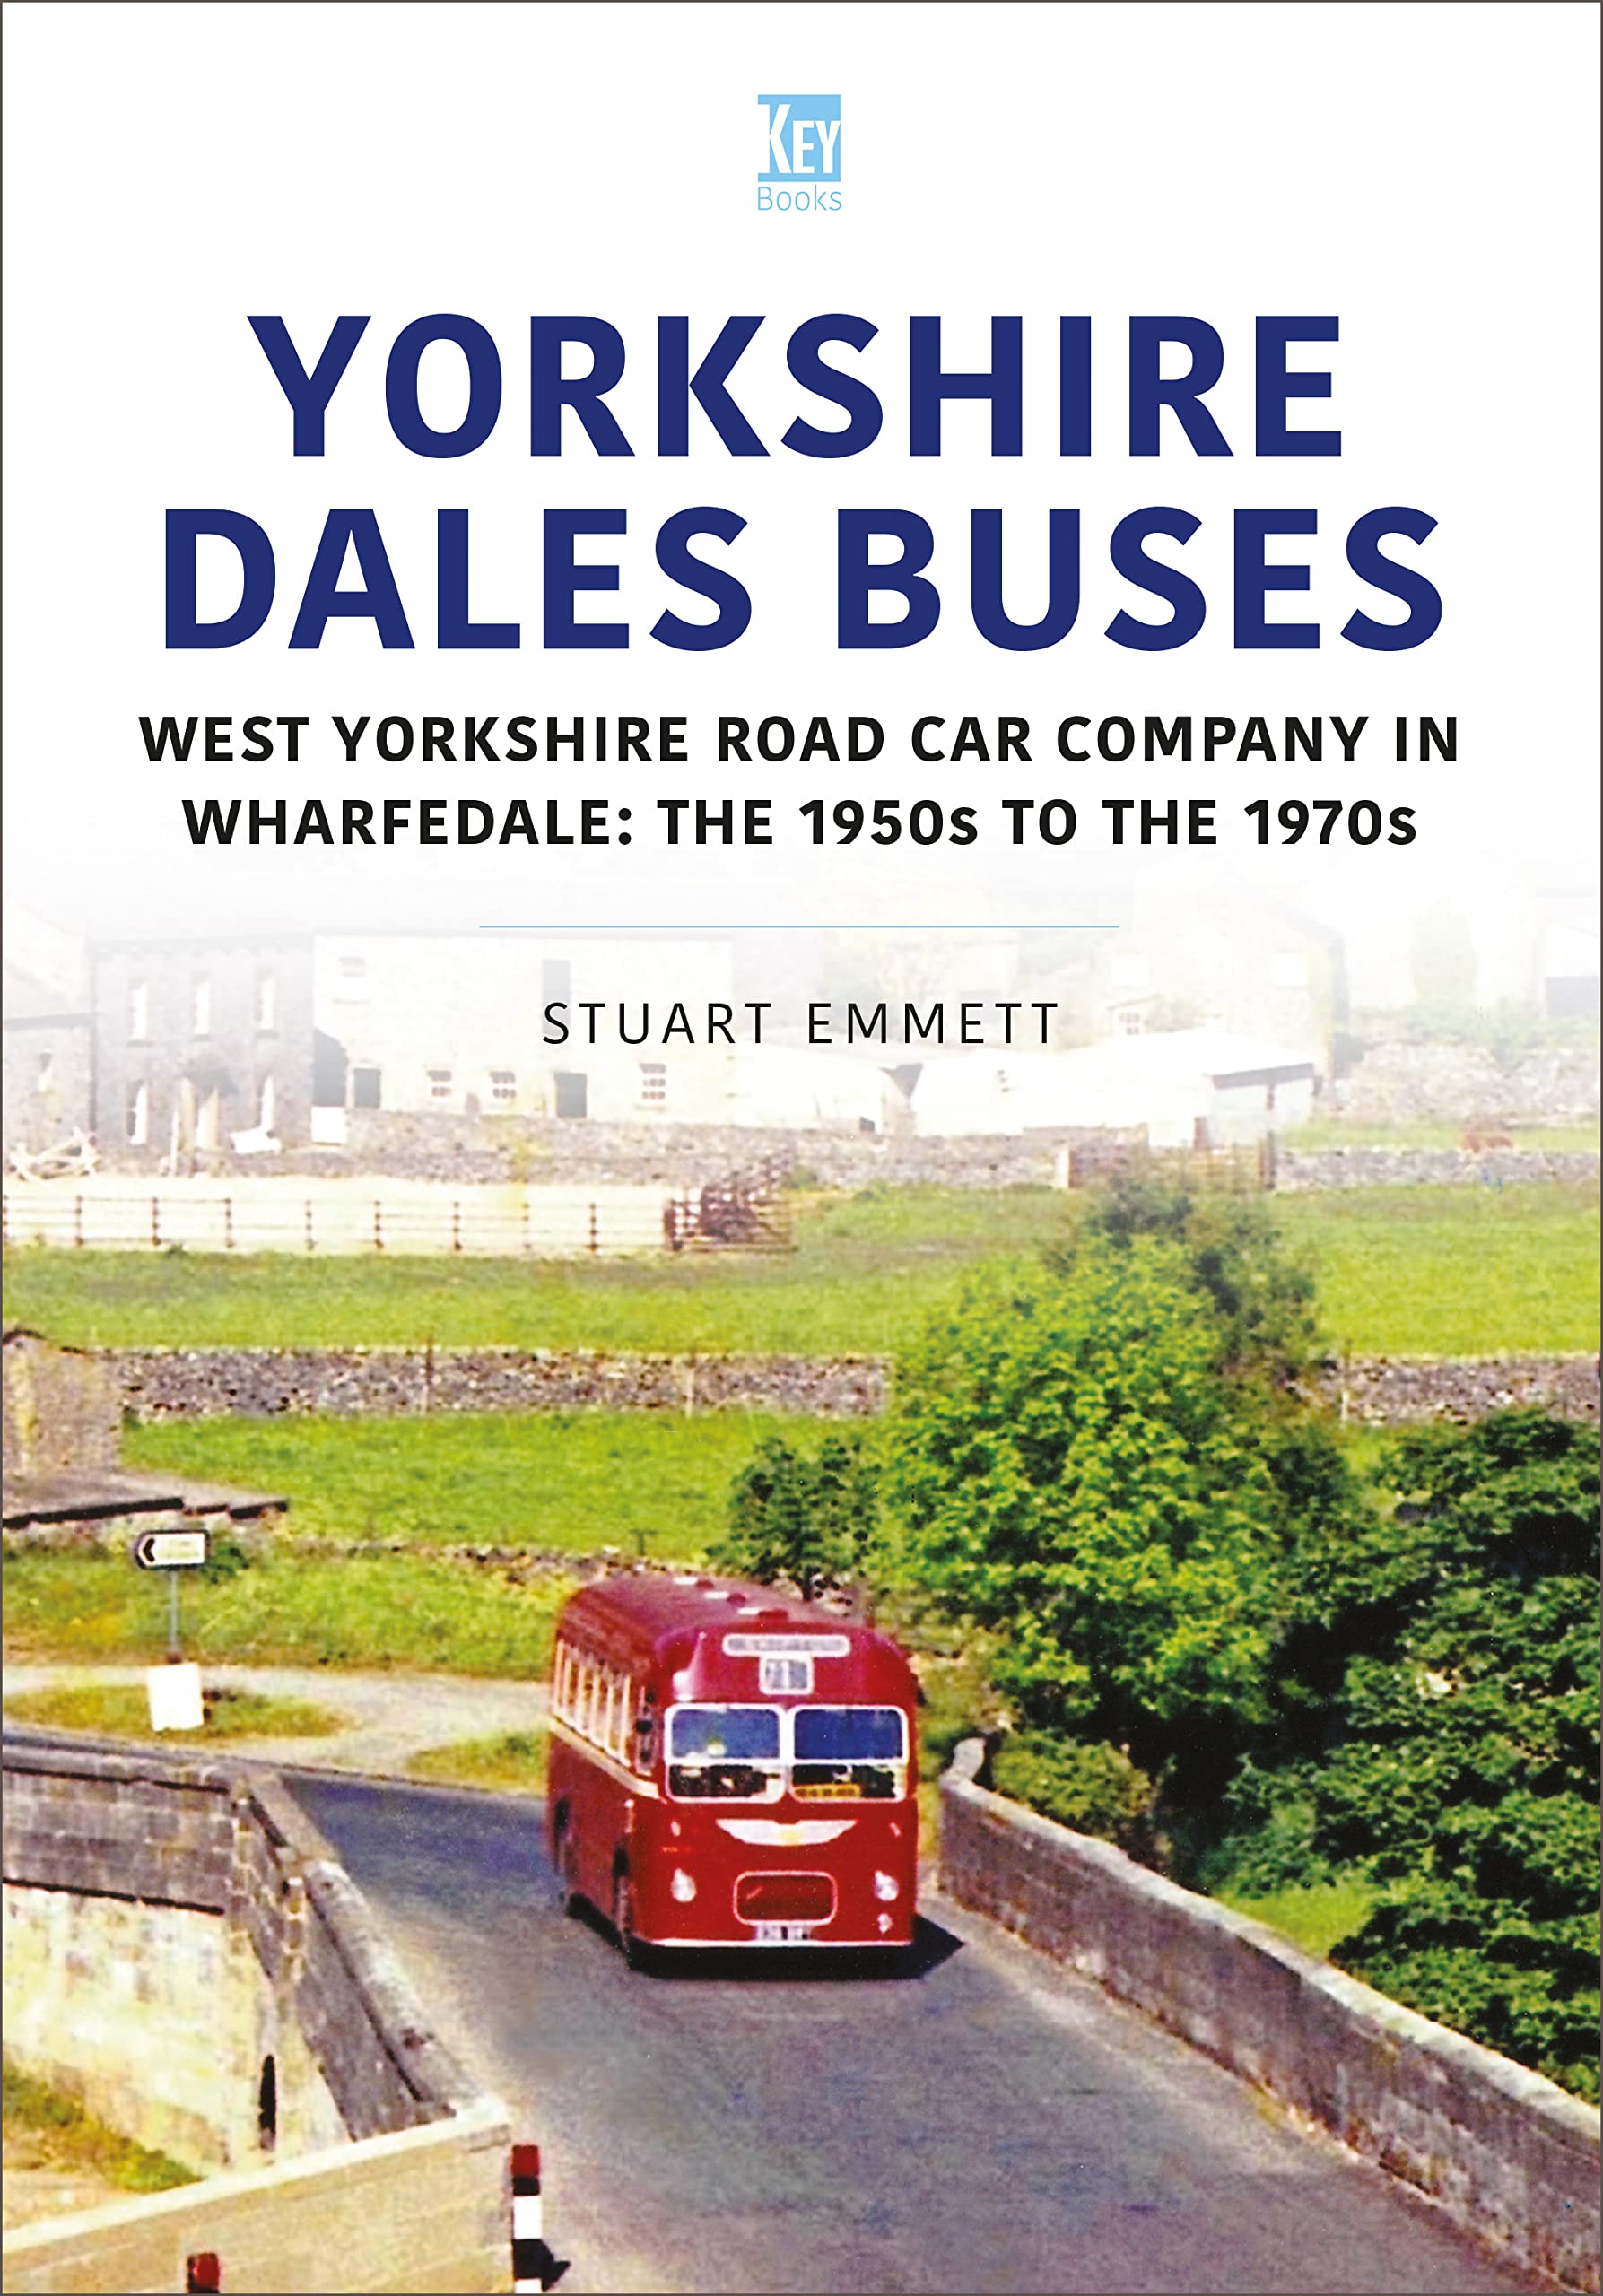 Yorkshire Dales Buses: West Yorkshire Road Car Company in Wharfedale  LAST FEW COPIES